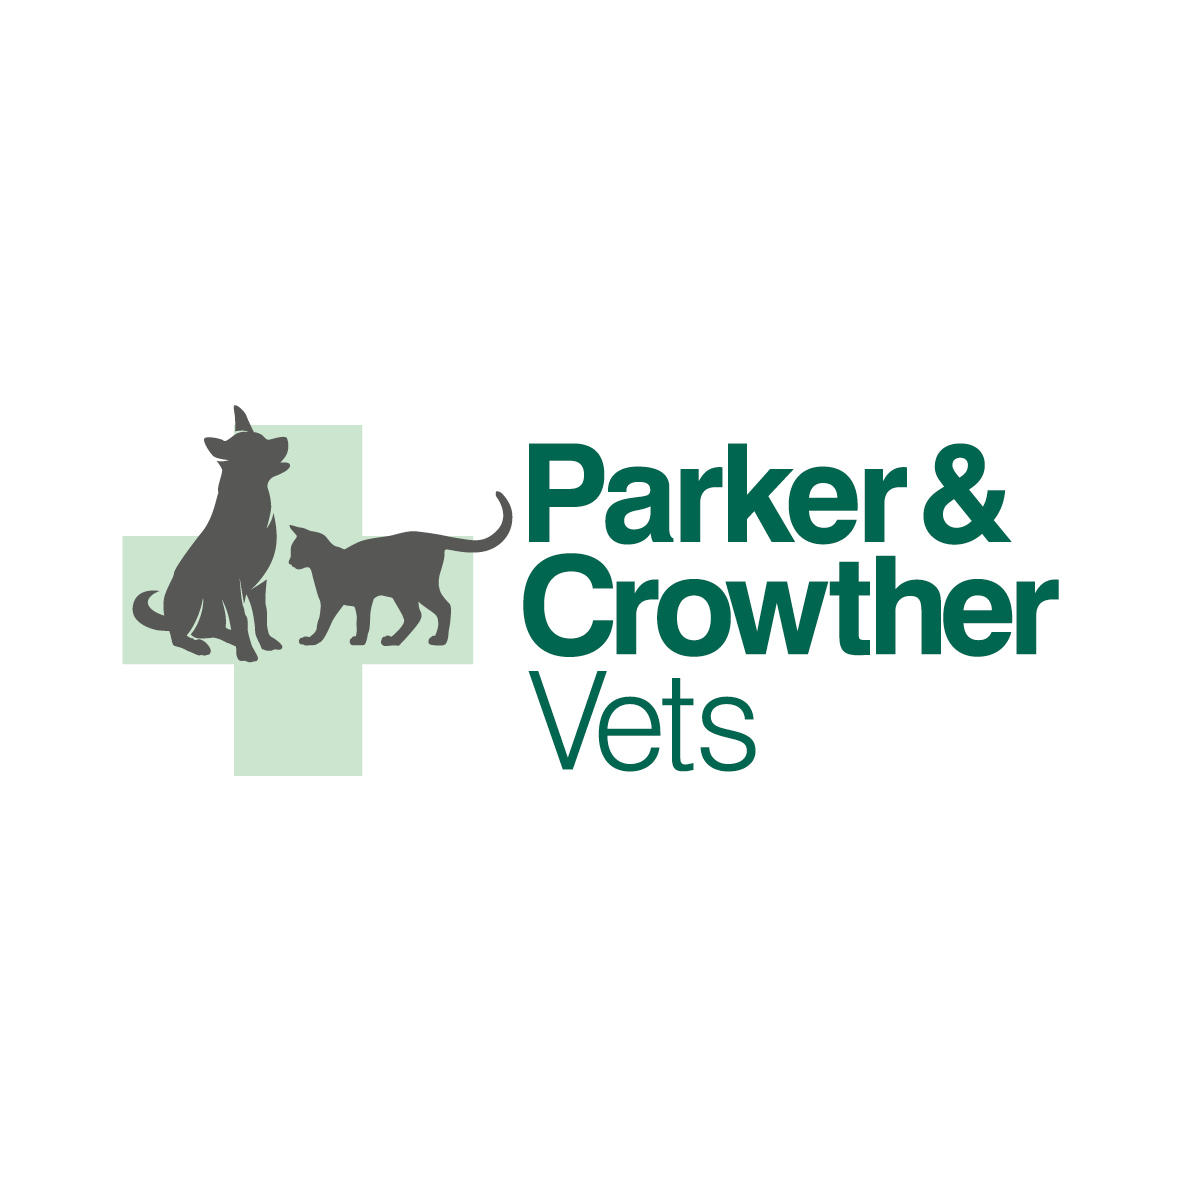 Parker & Crowther Vets, Formby - Liverpool, Merseyside L37 3ND - 01704 877145 | ShowMeLocal.com